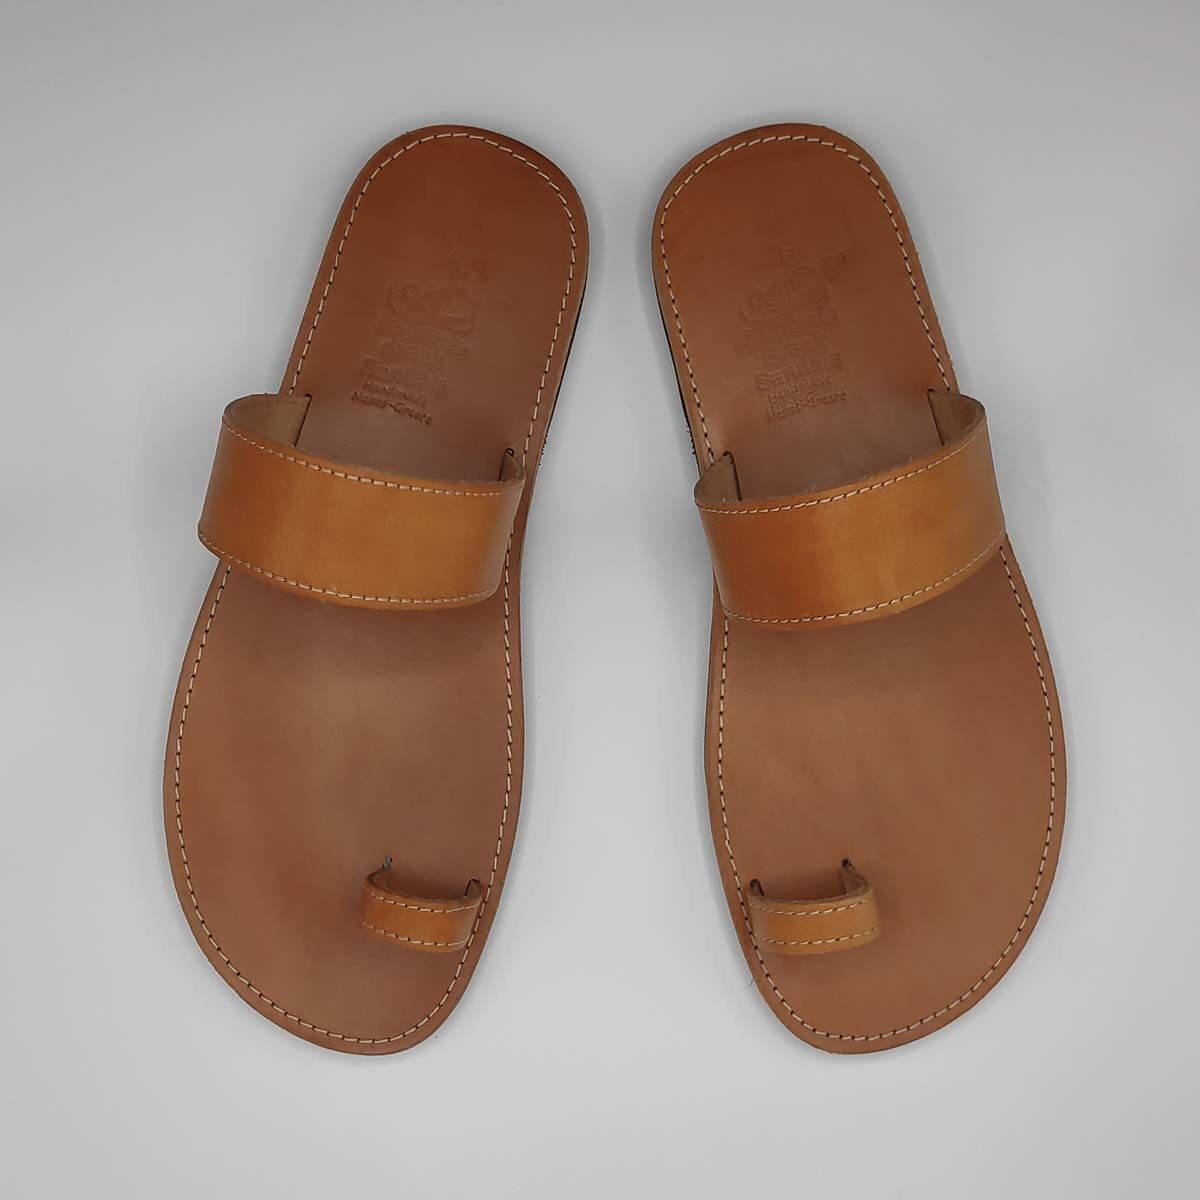 Tan leather toe loop sandals for men Handmade in Italy | The leather  craftsmen